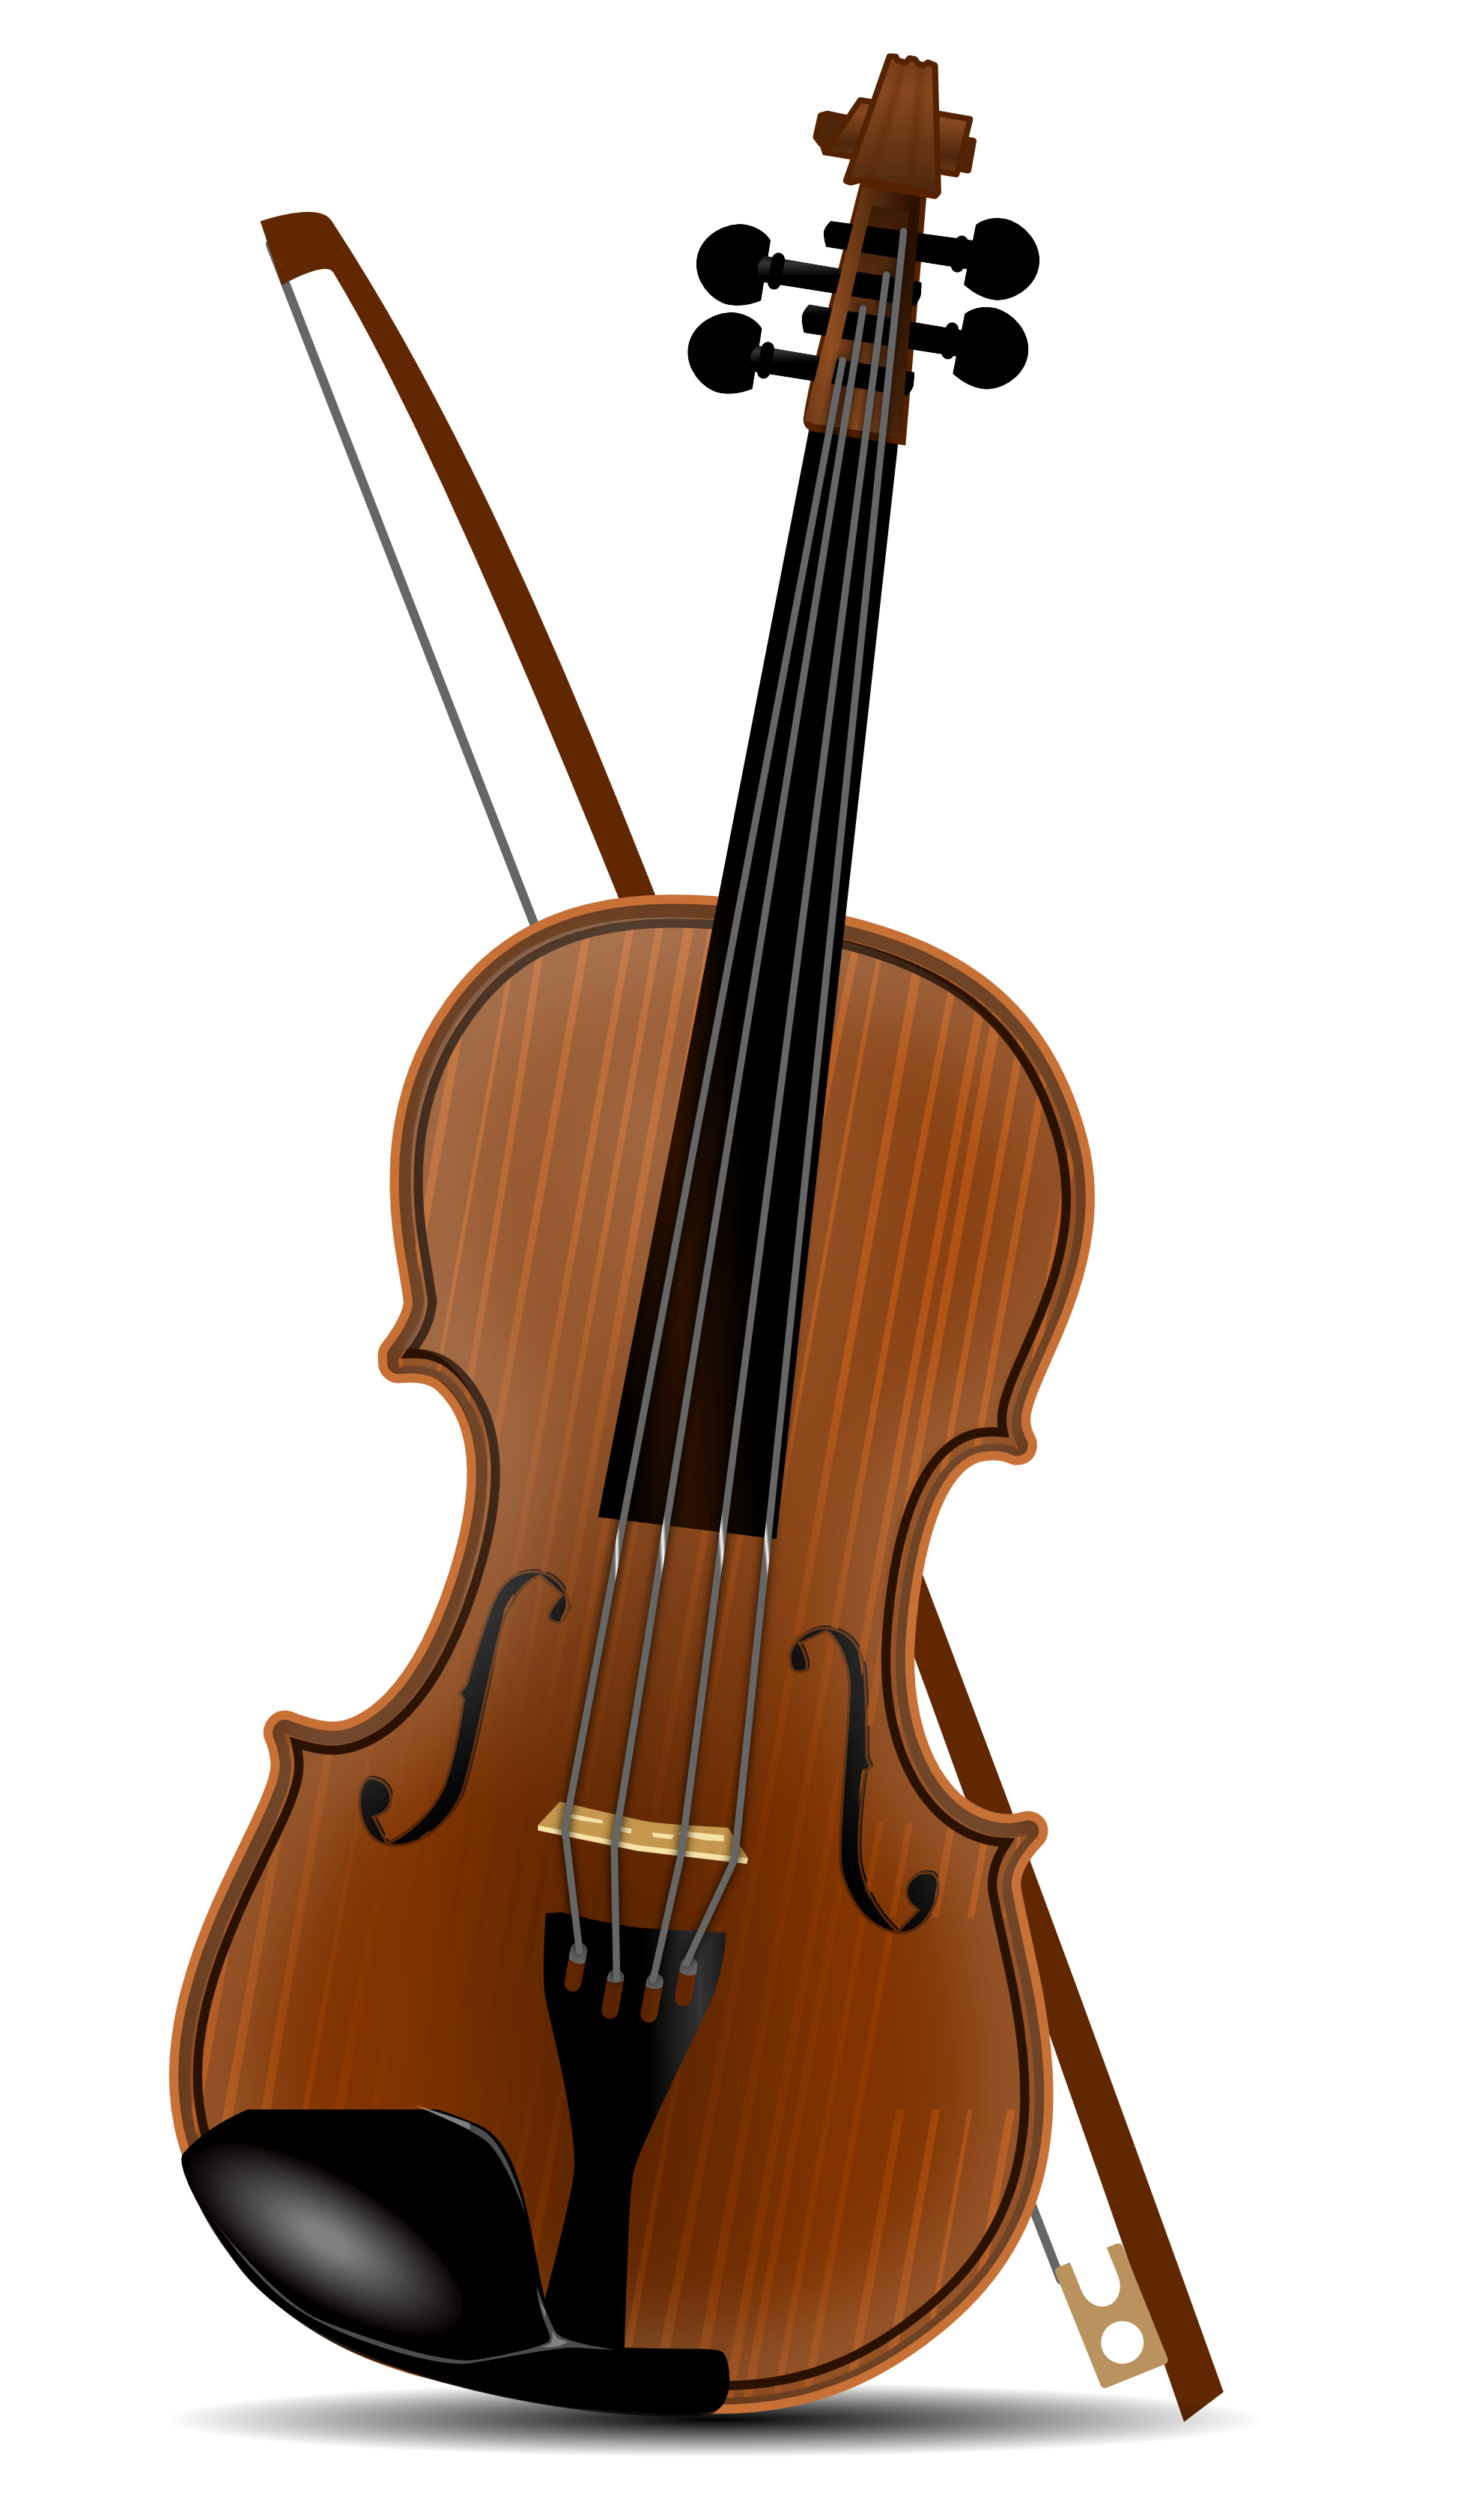 Playing violin black and. Guitar clipart crossed